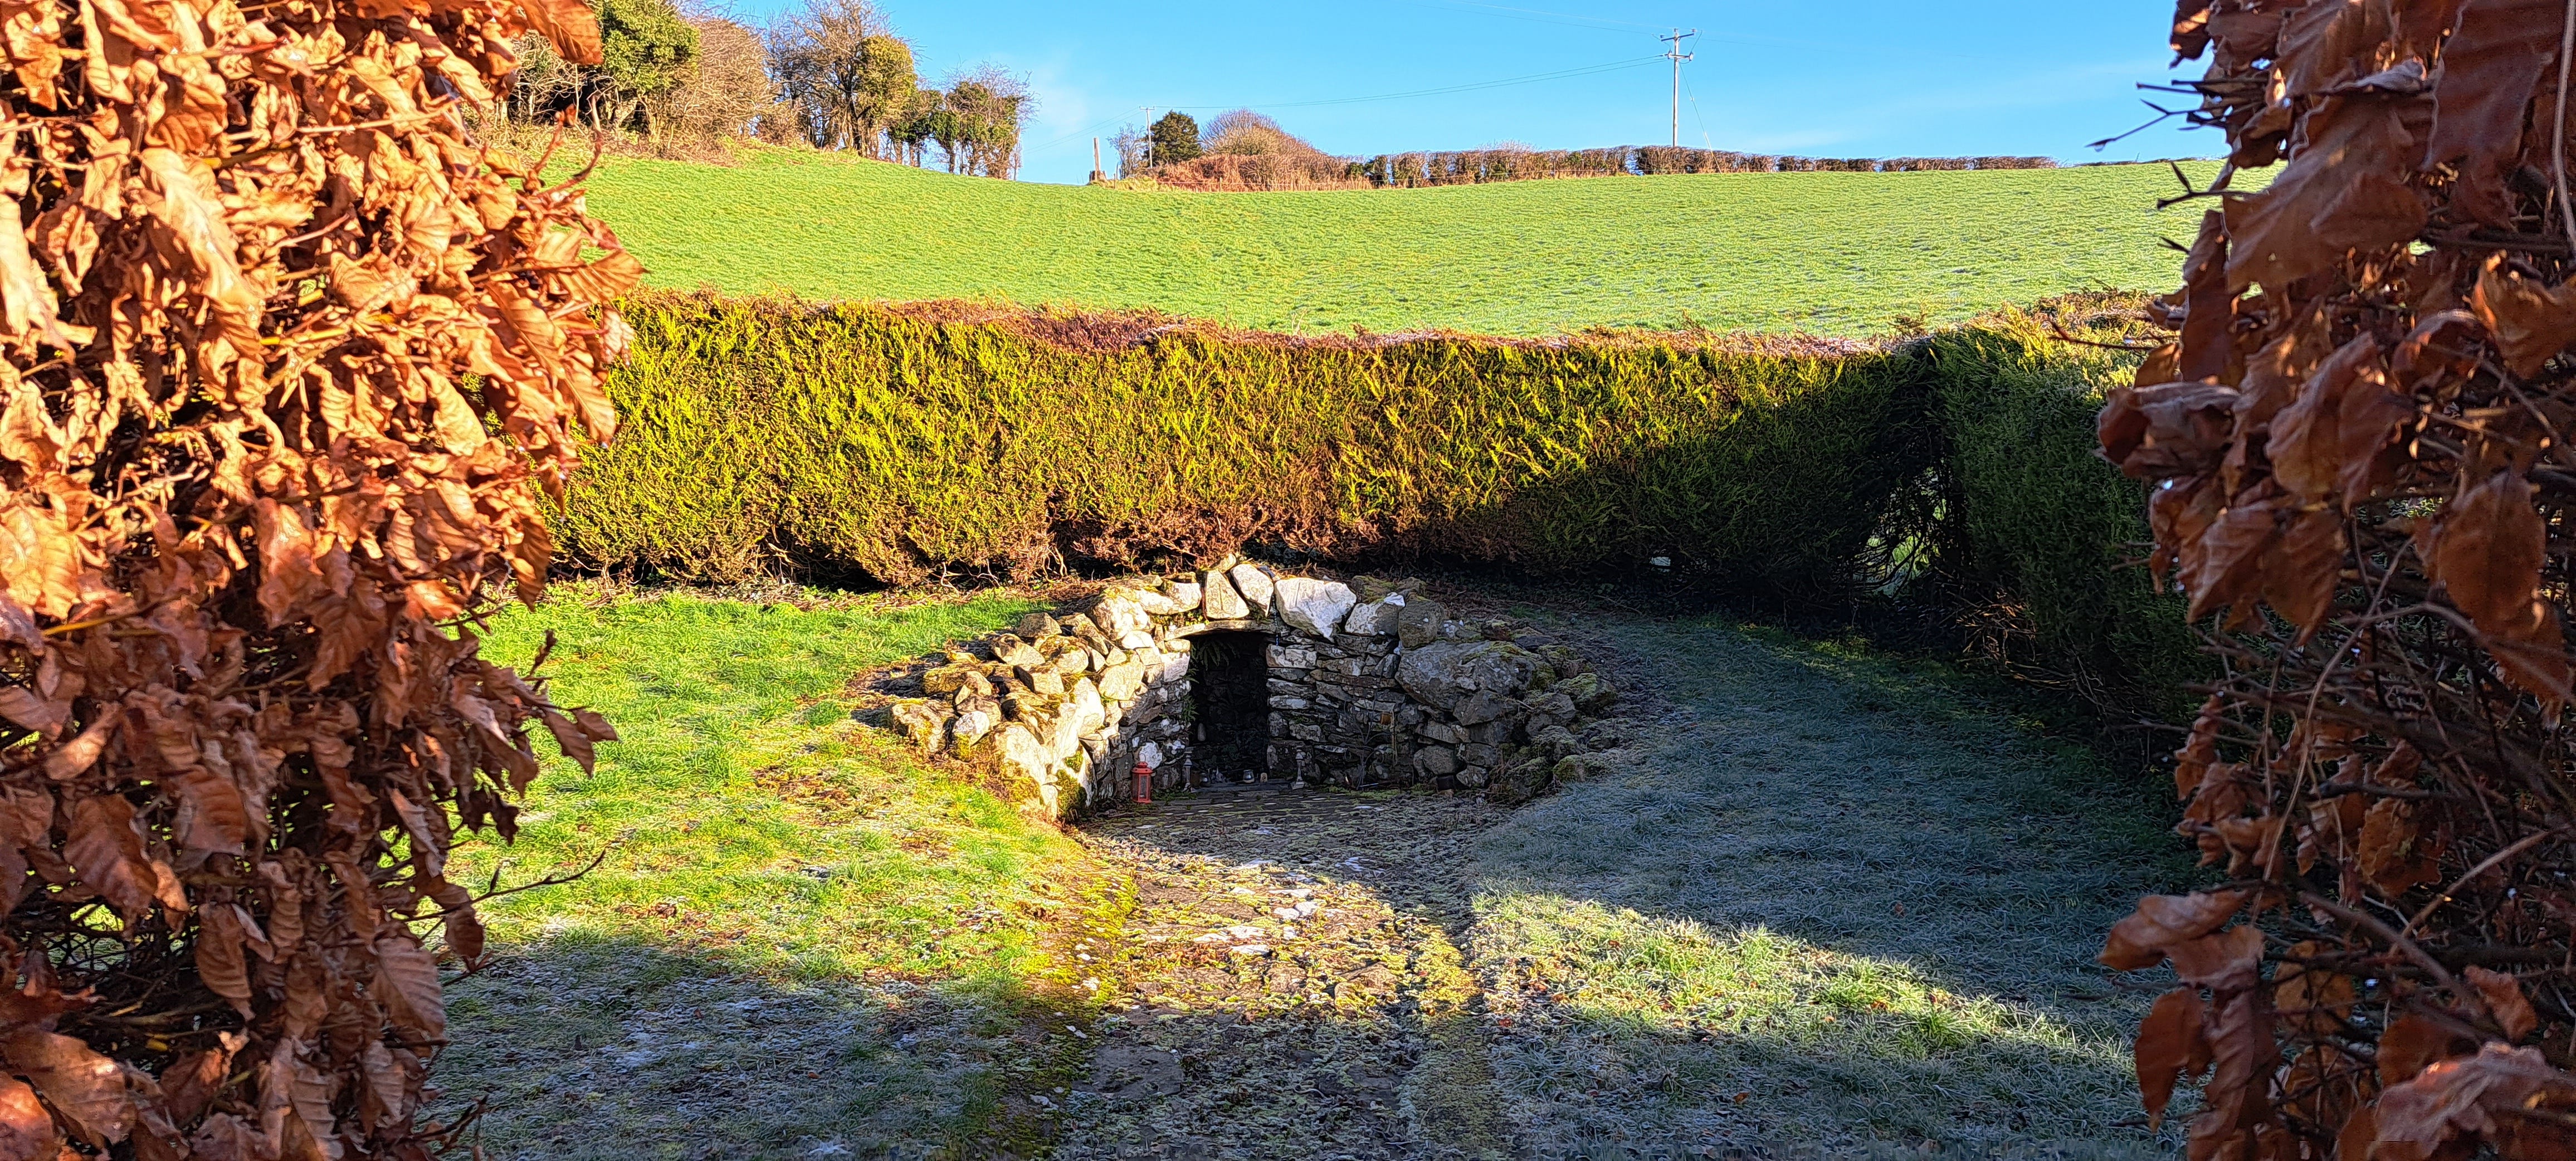 Looking through a gap in the hedge at a holy well set below a hill; the well is built into the hill with a rough stone facade arched with an opening to the water, its almost like a tiny cave in the hillside.